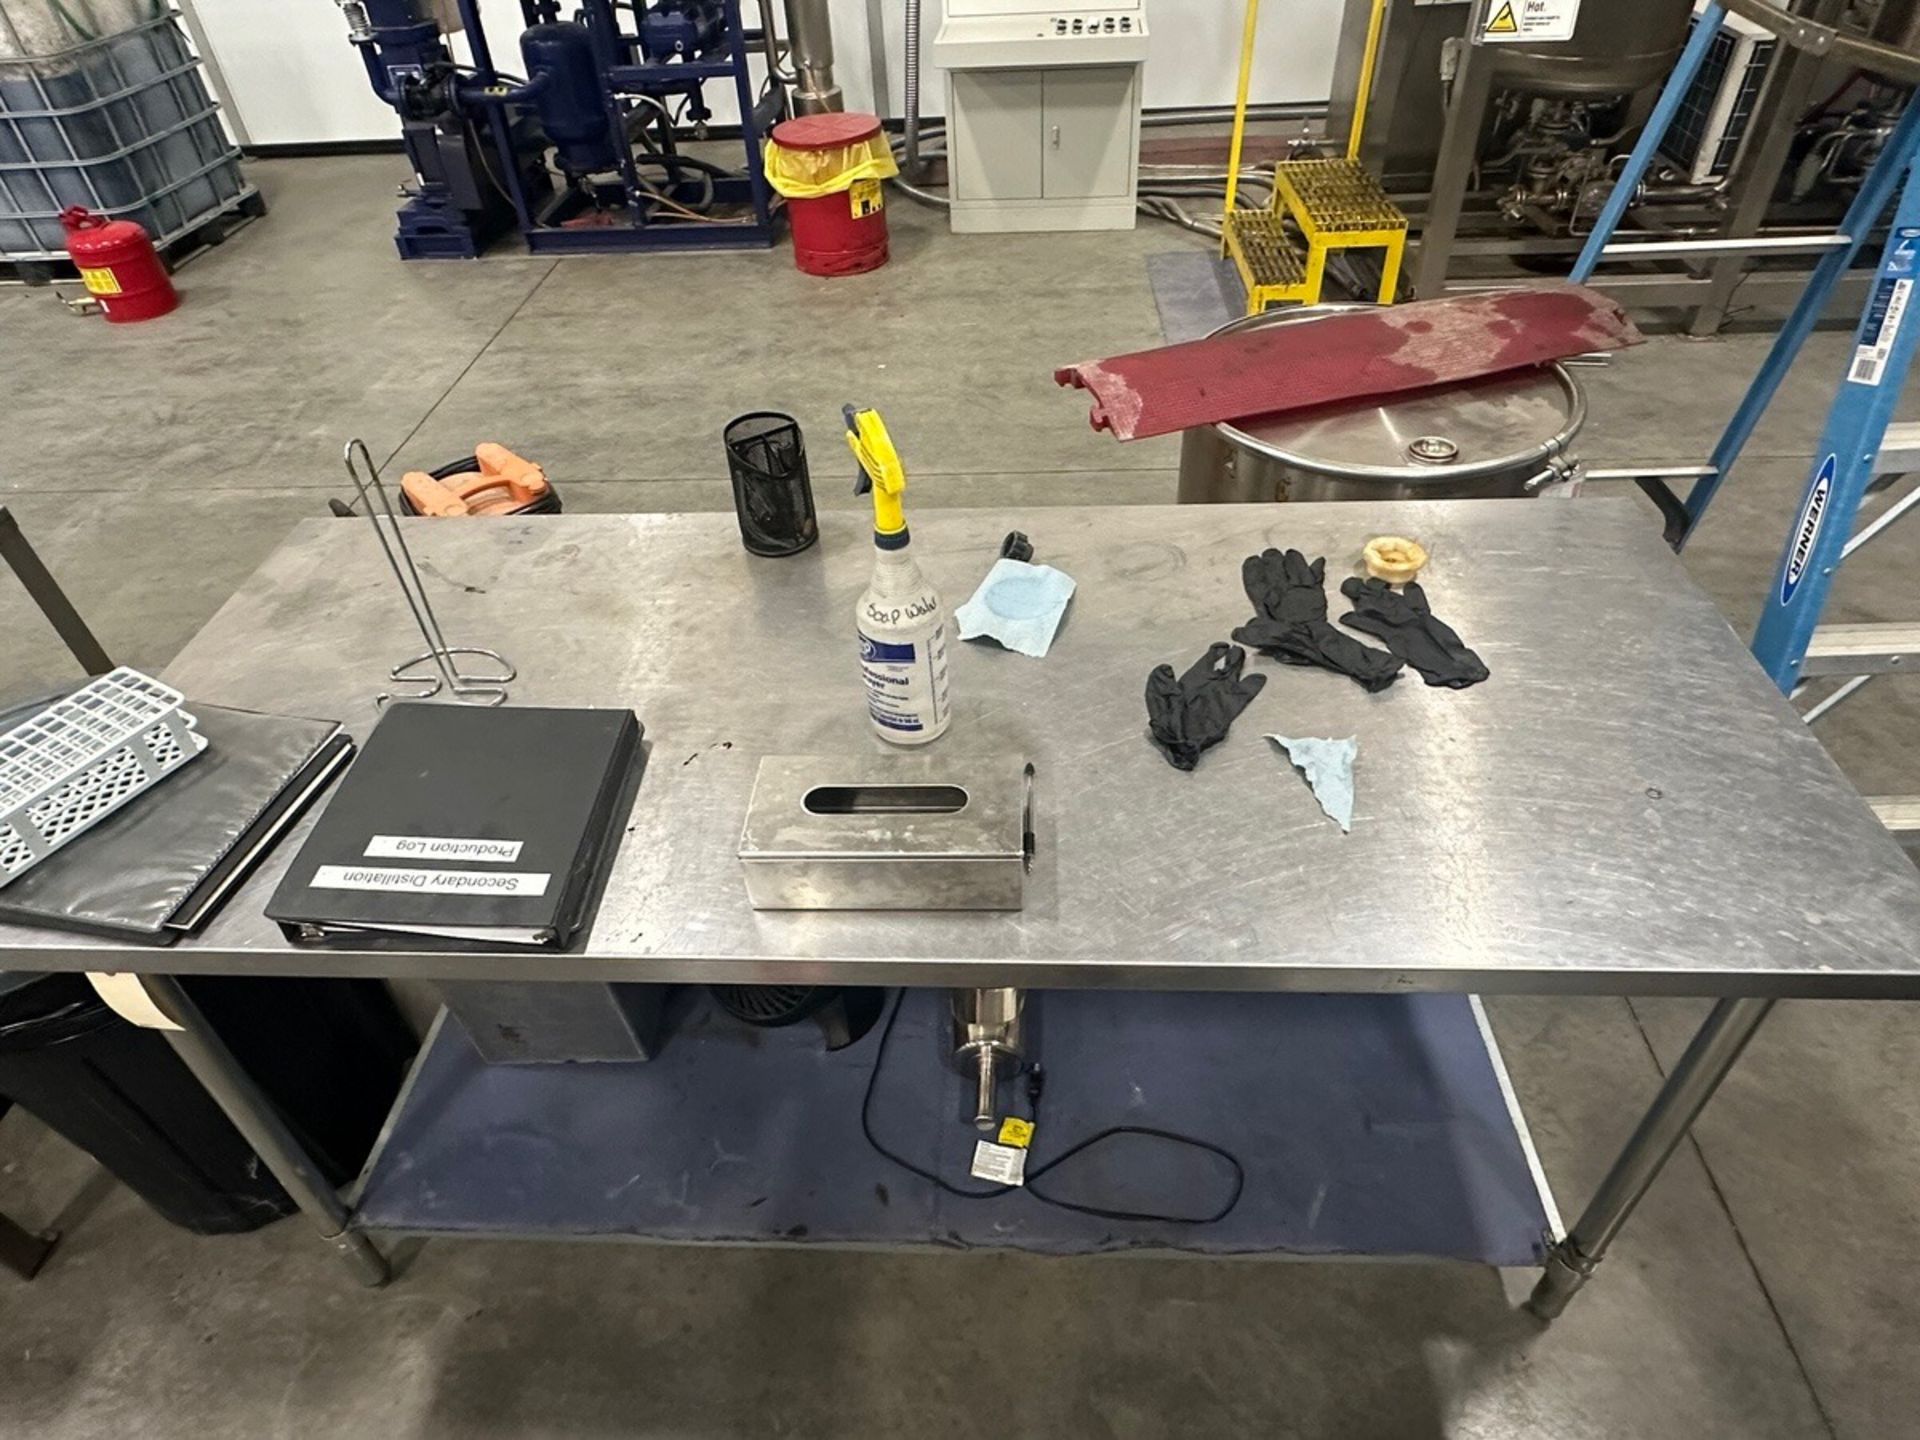 Stainless Steel Table, No Contents | Rig Fee $50 - Image 2 of 4